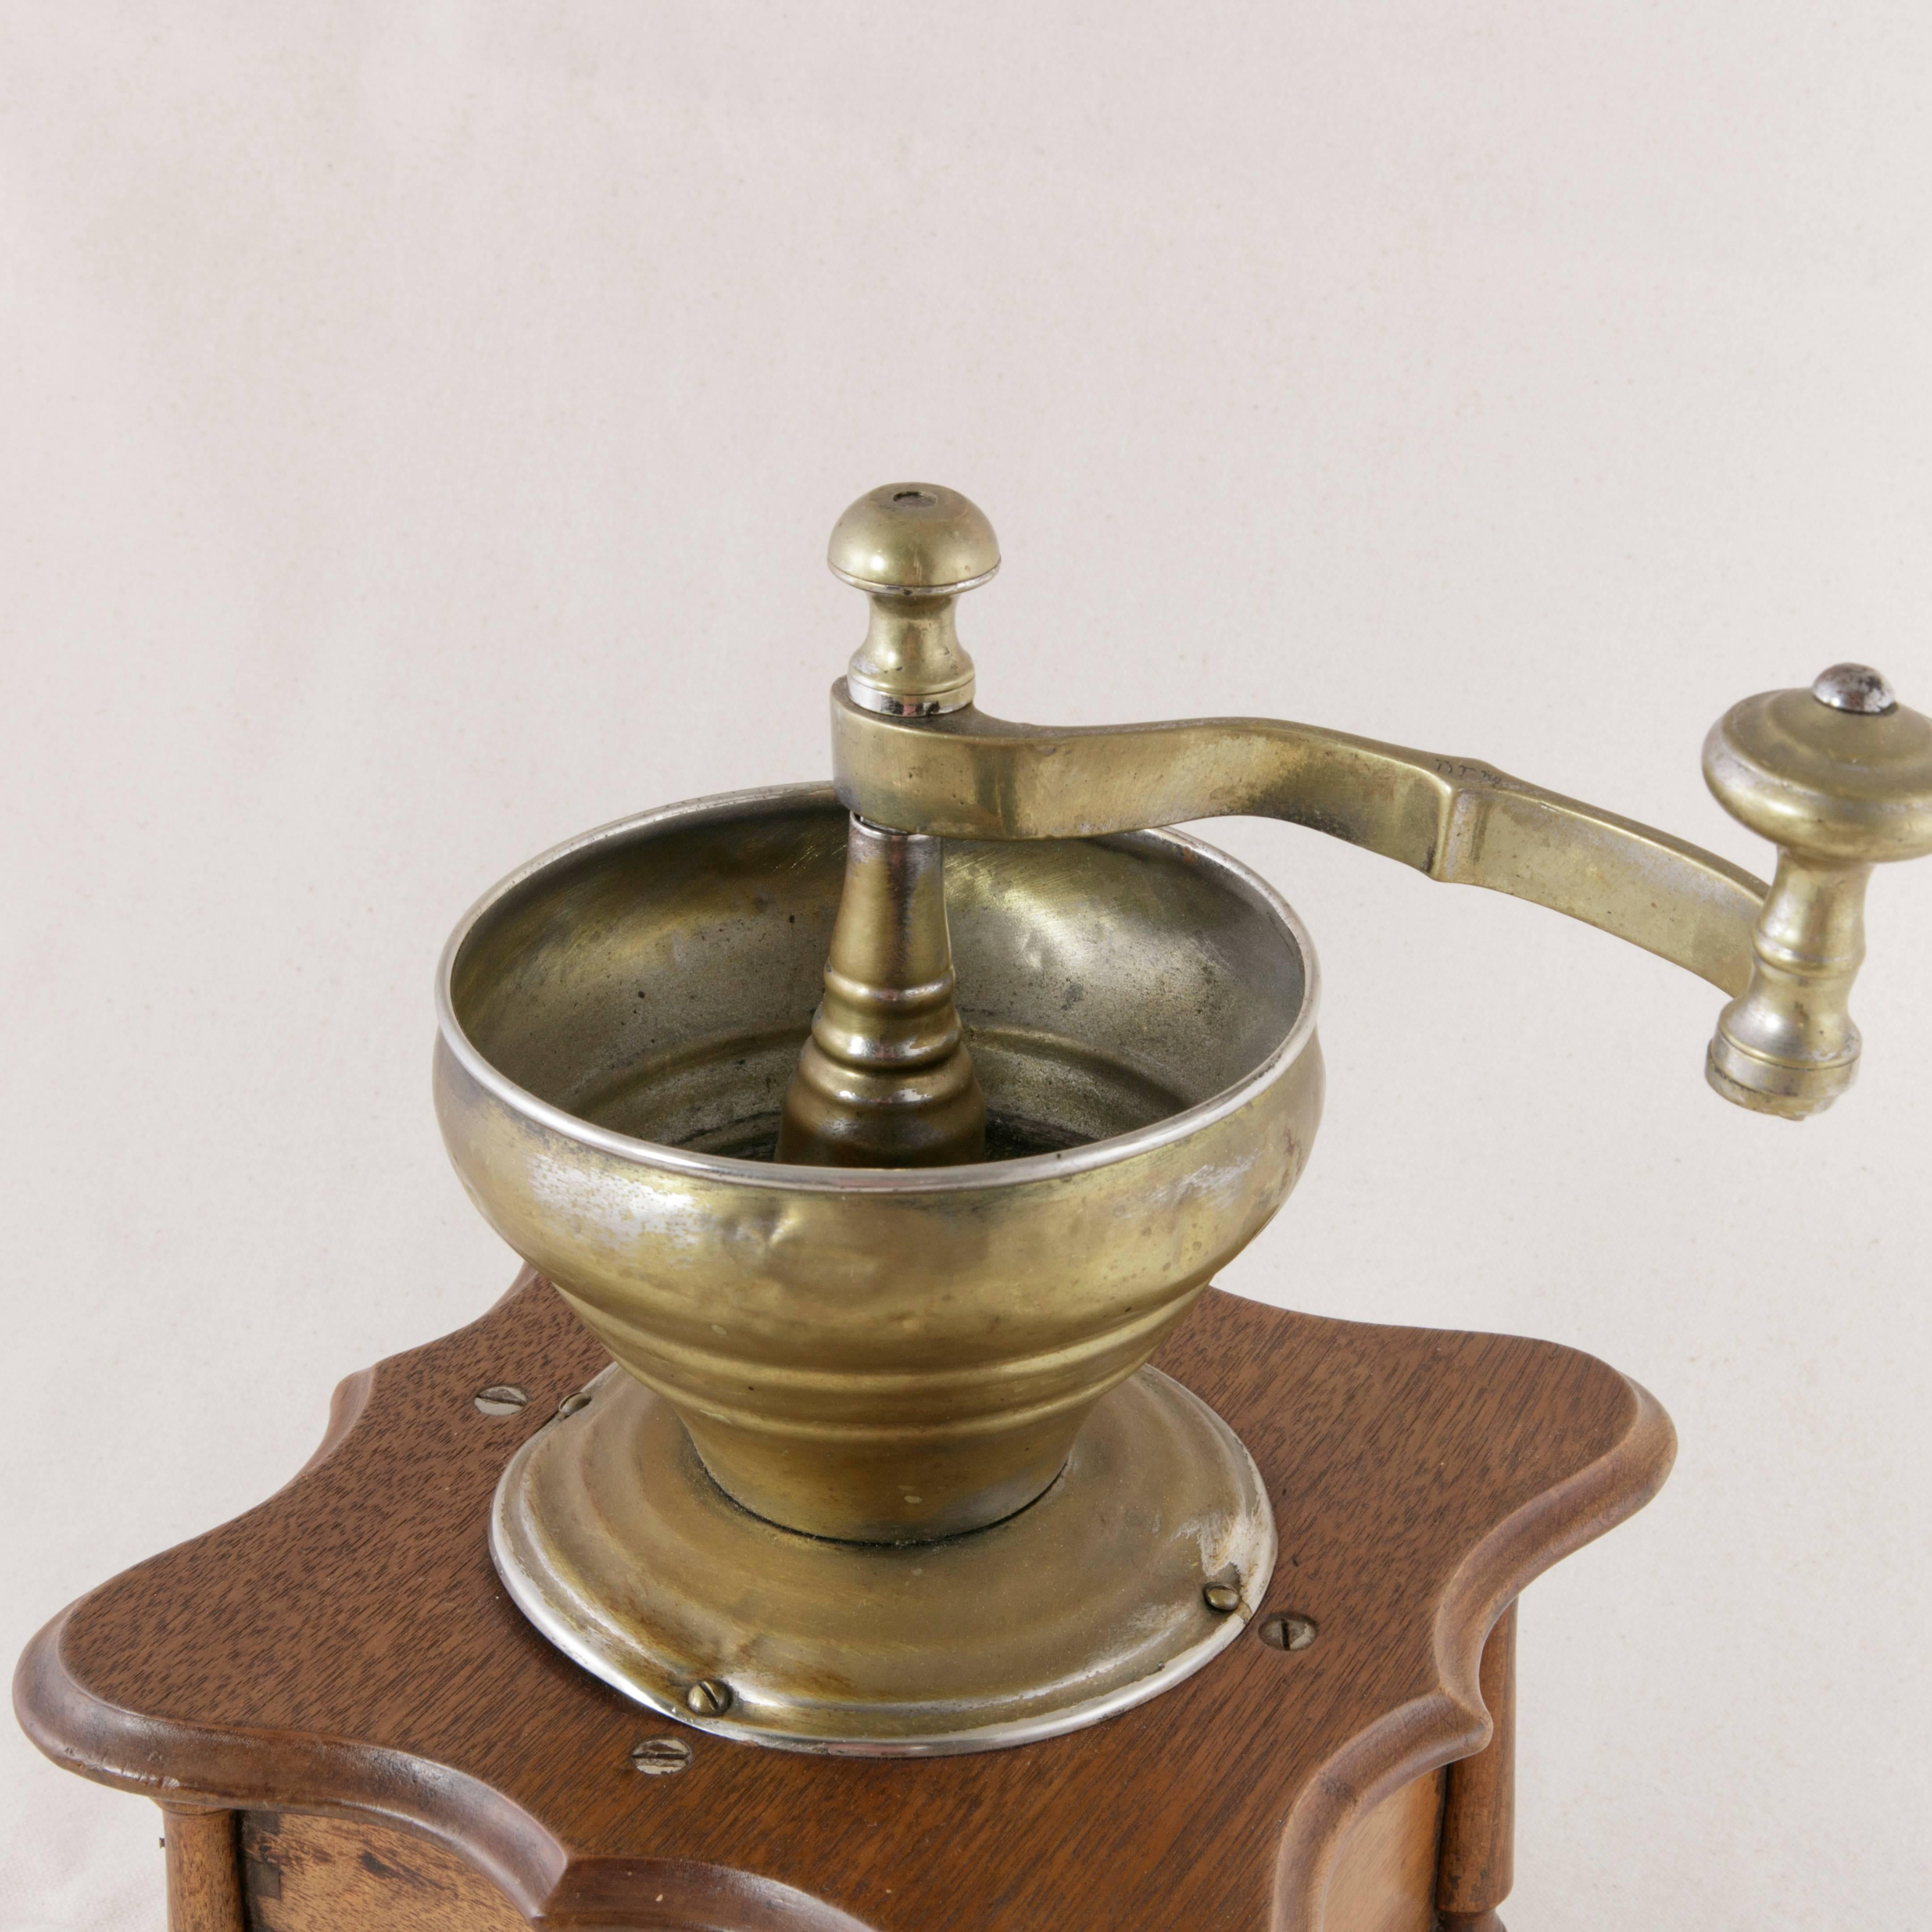 Wood Late 19th Century French Walnut Coffee Grinder with Brass Funnel and Mechanism